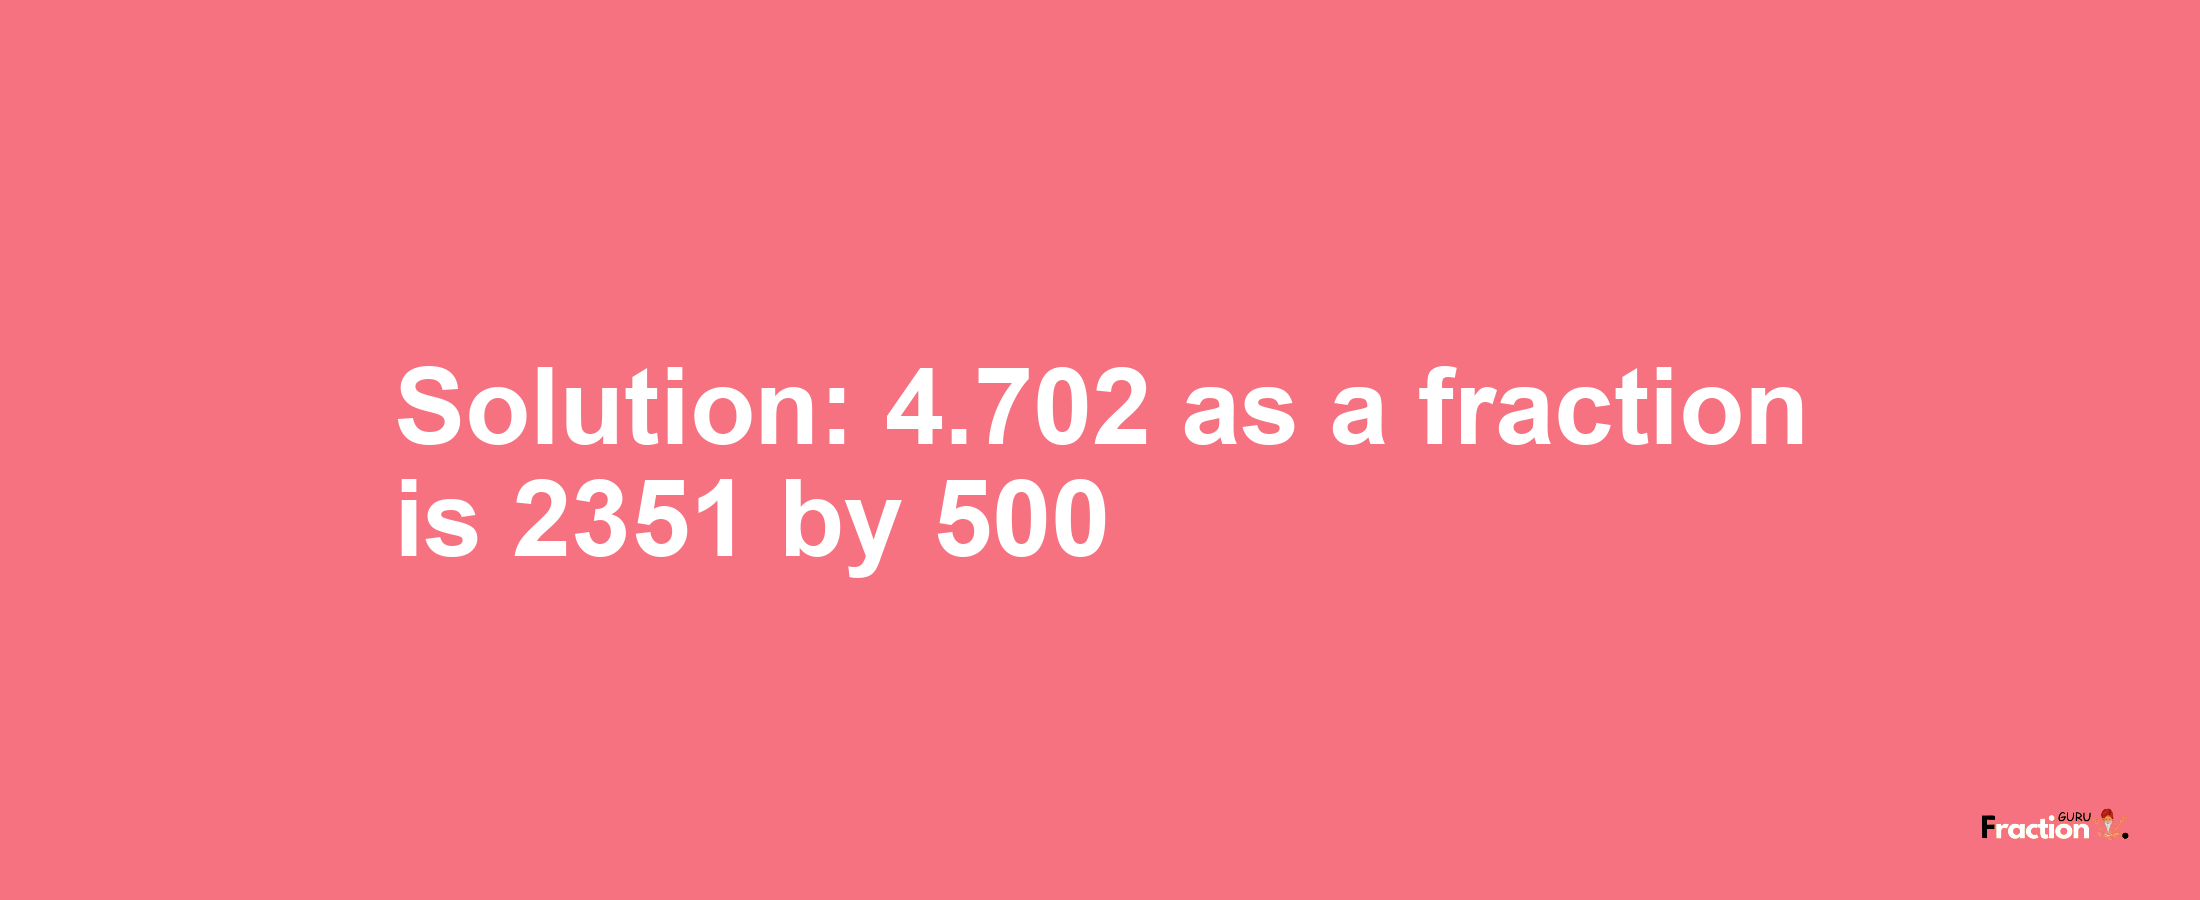 Solution:4.702 as a fraction is 2351/500